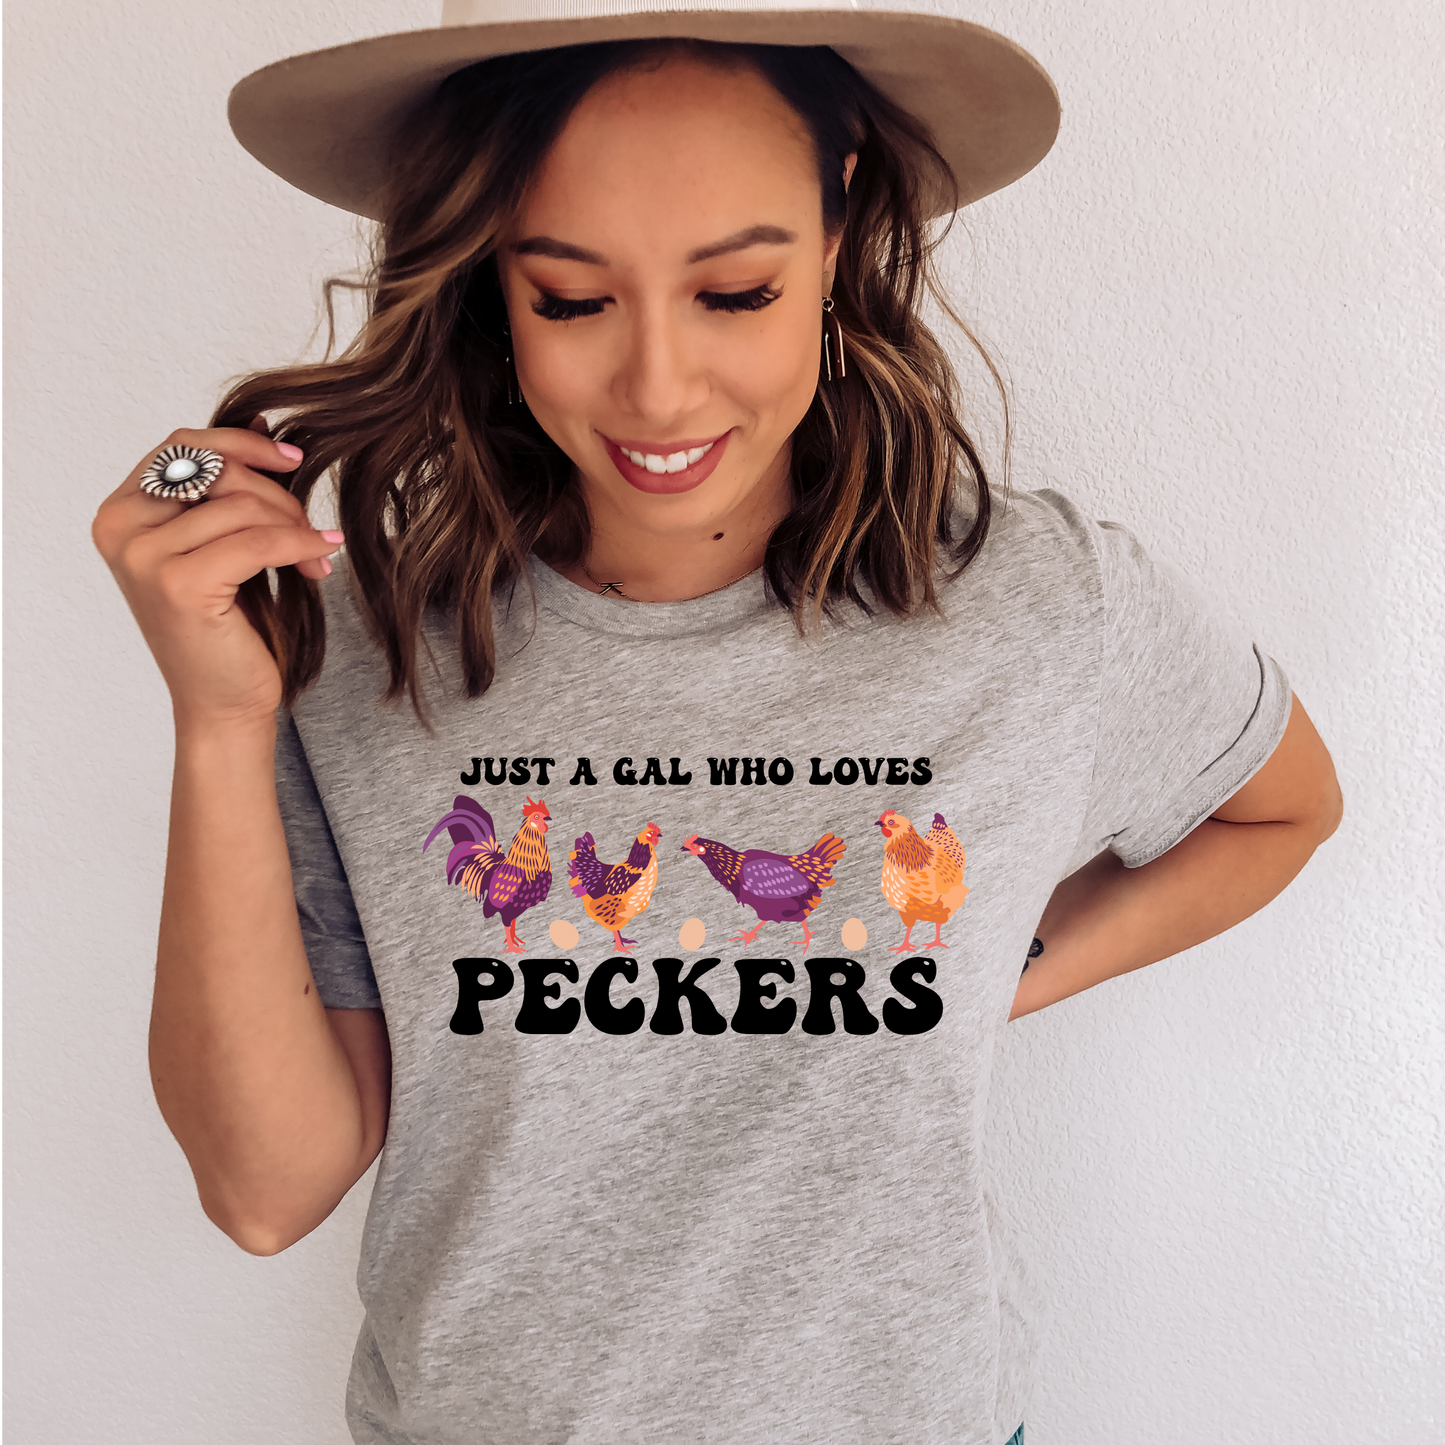 Just a Gal Who Loves Peckers - Chicken Tee